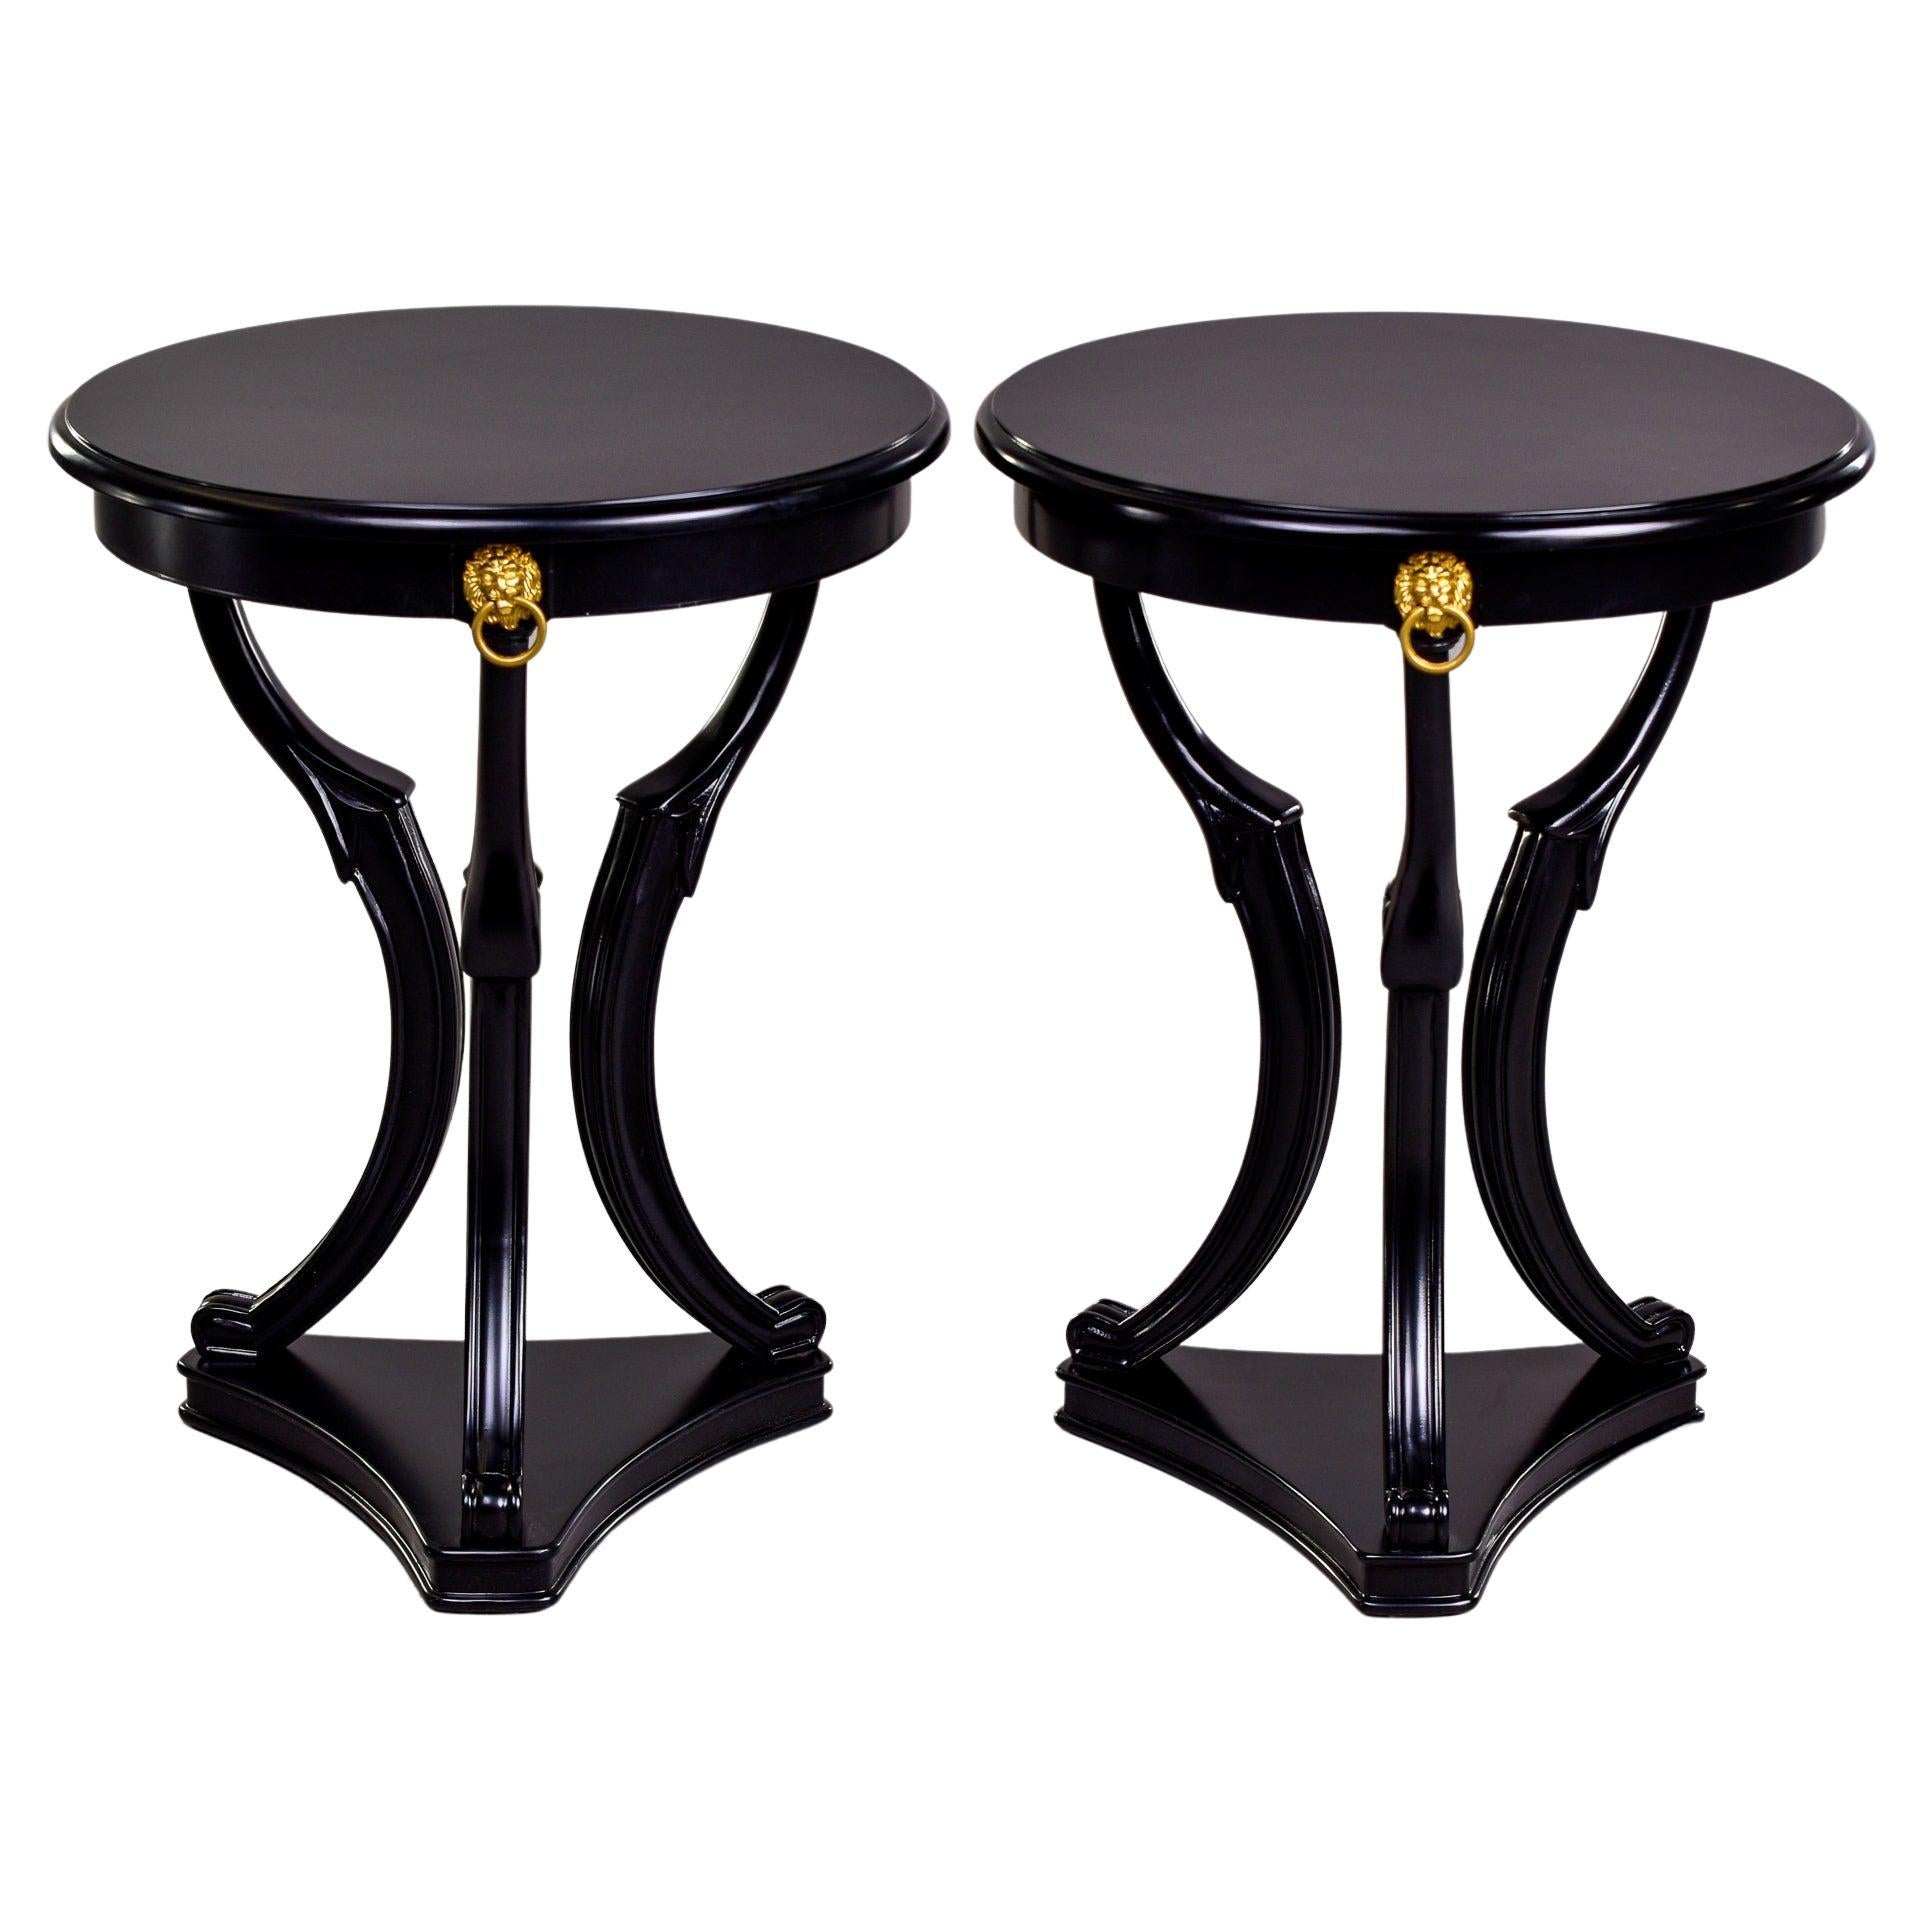 Pair of Early 20th C Neoclassical Black French Gueridon Side Tables